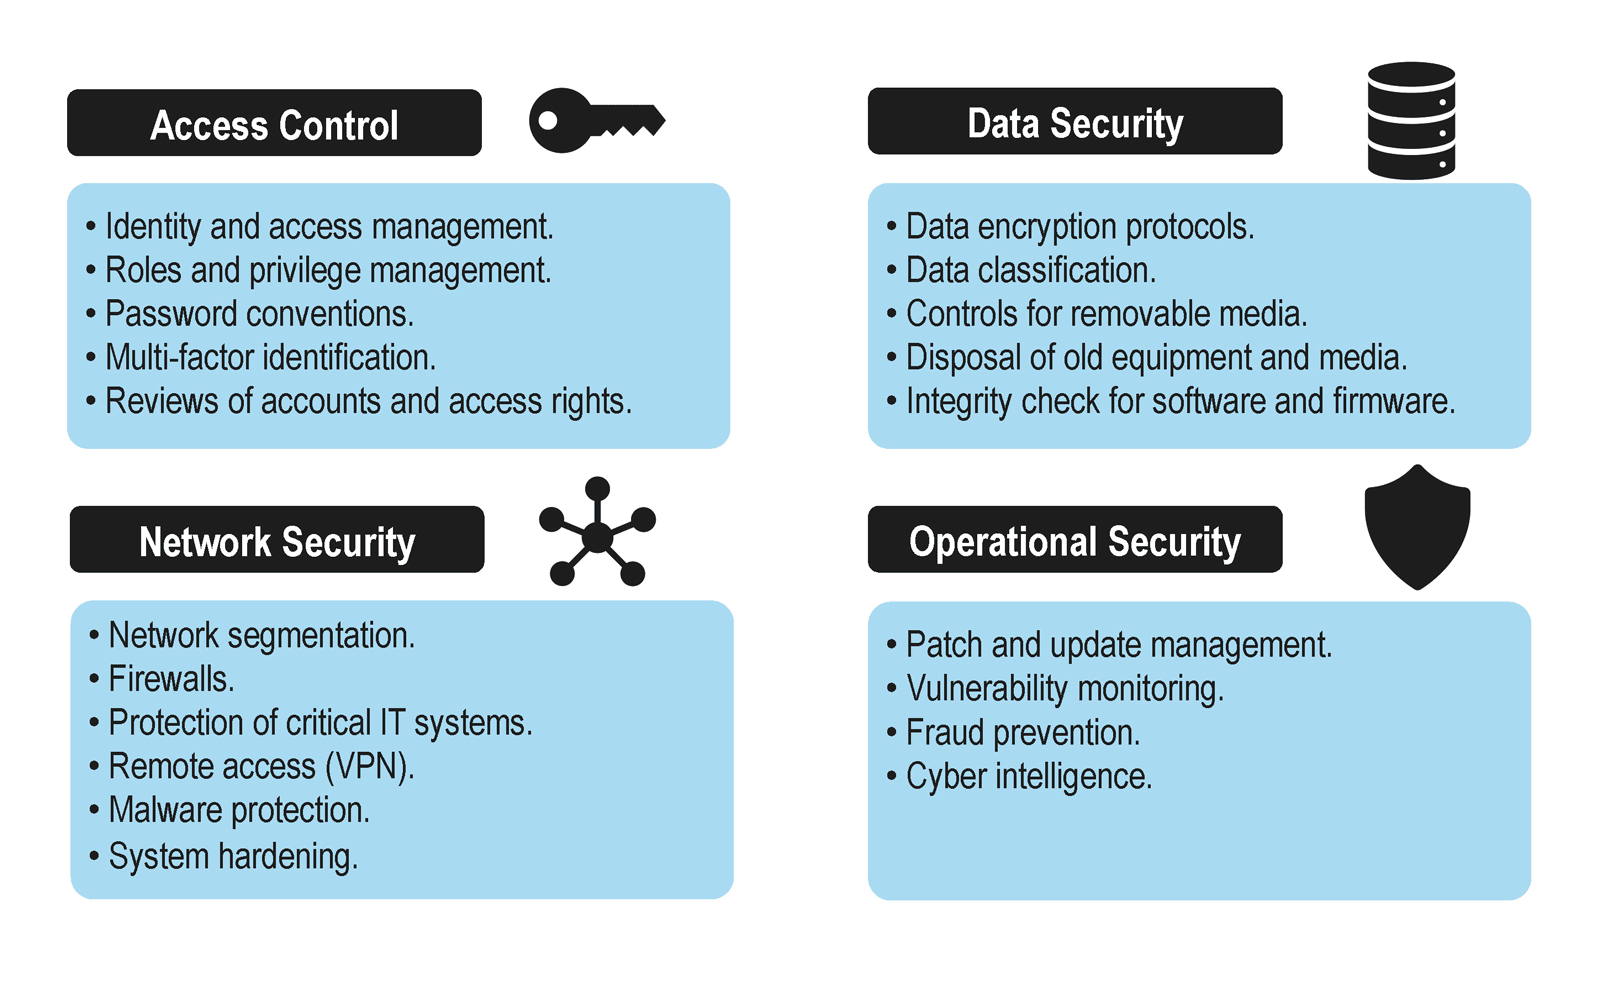 Cyber-resiliency measures for information technologies